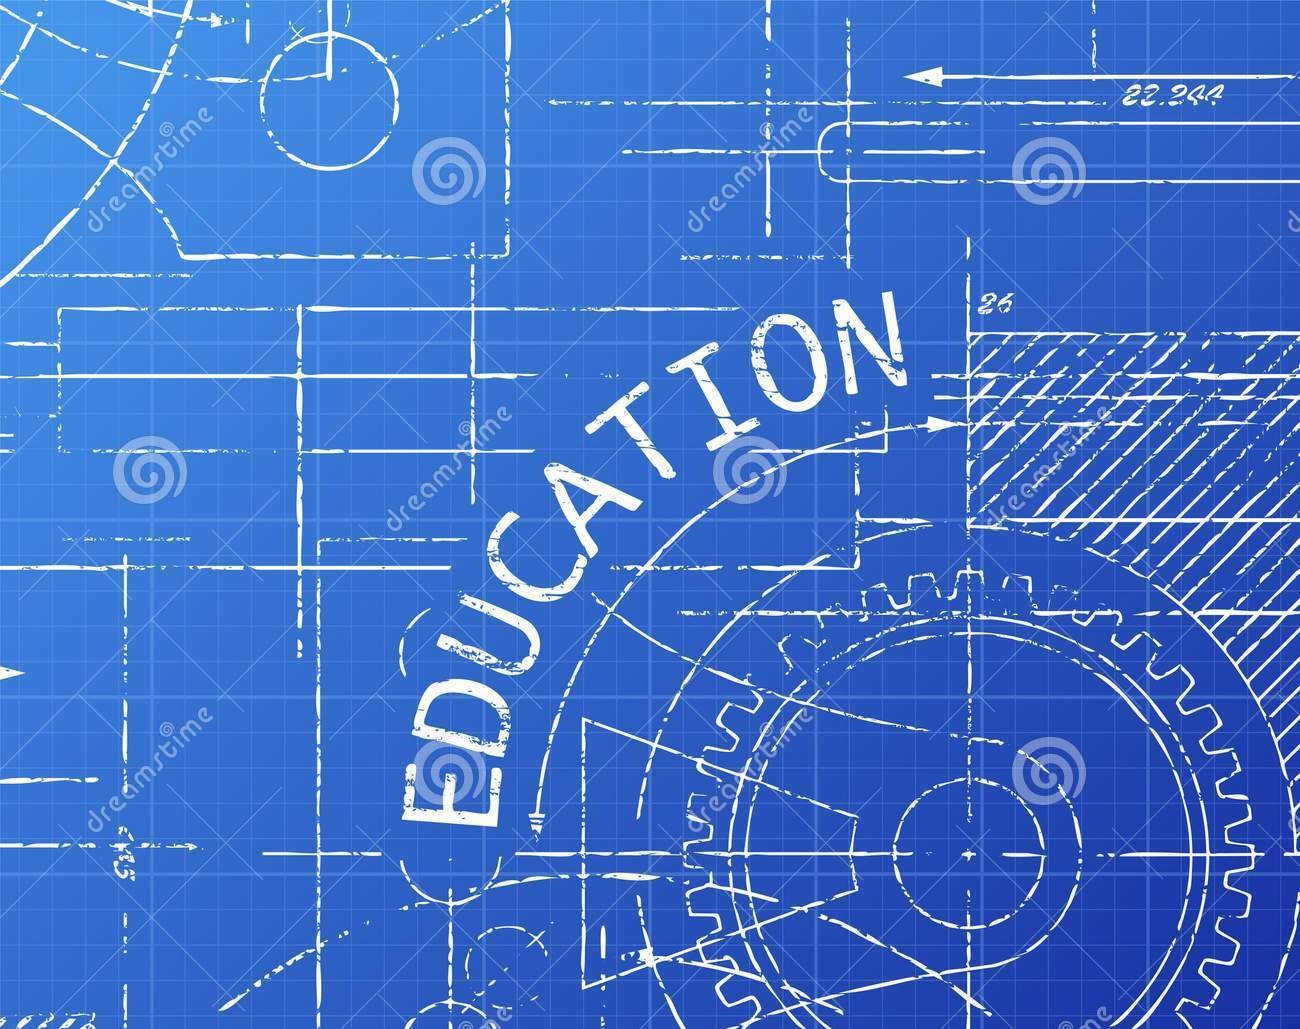 education-blueprint-machine-text-gear-wheels-hand-drawn-technical-drawing-background-123887931